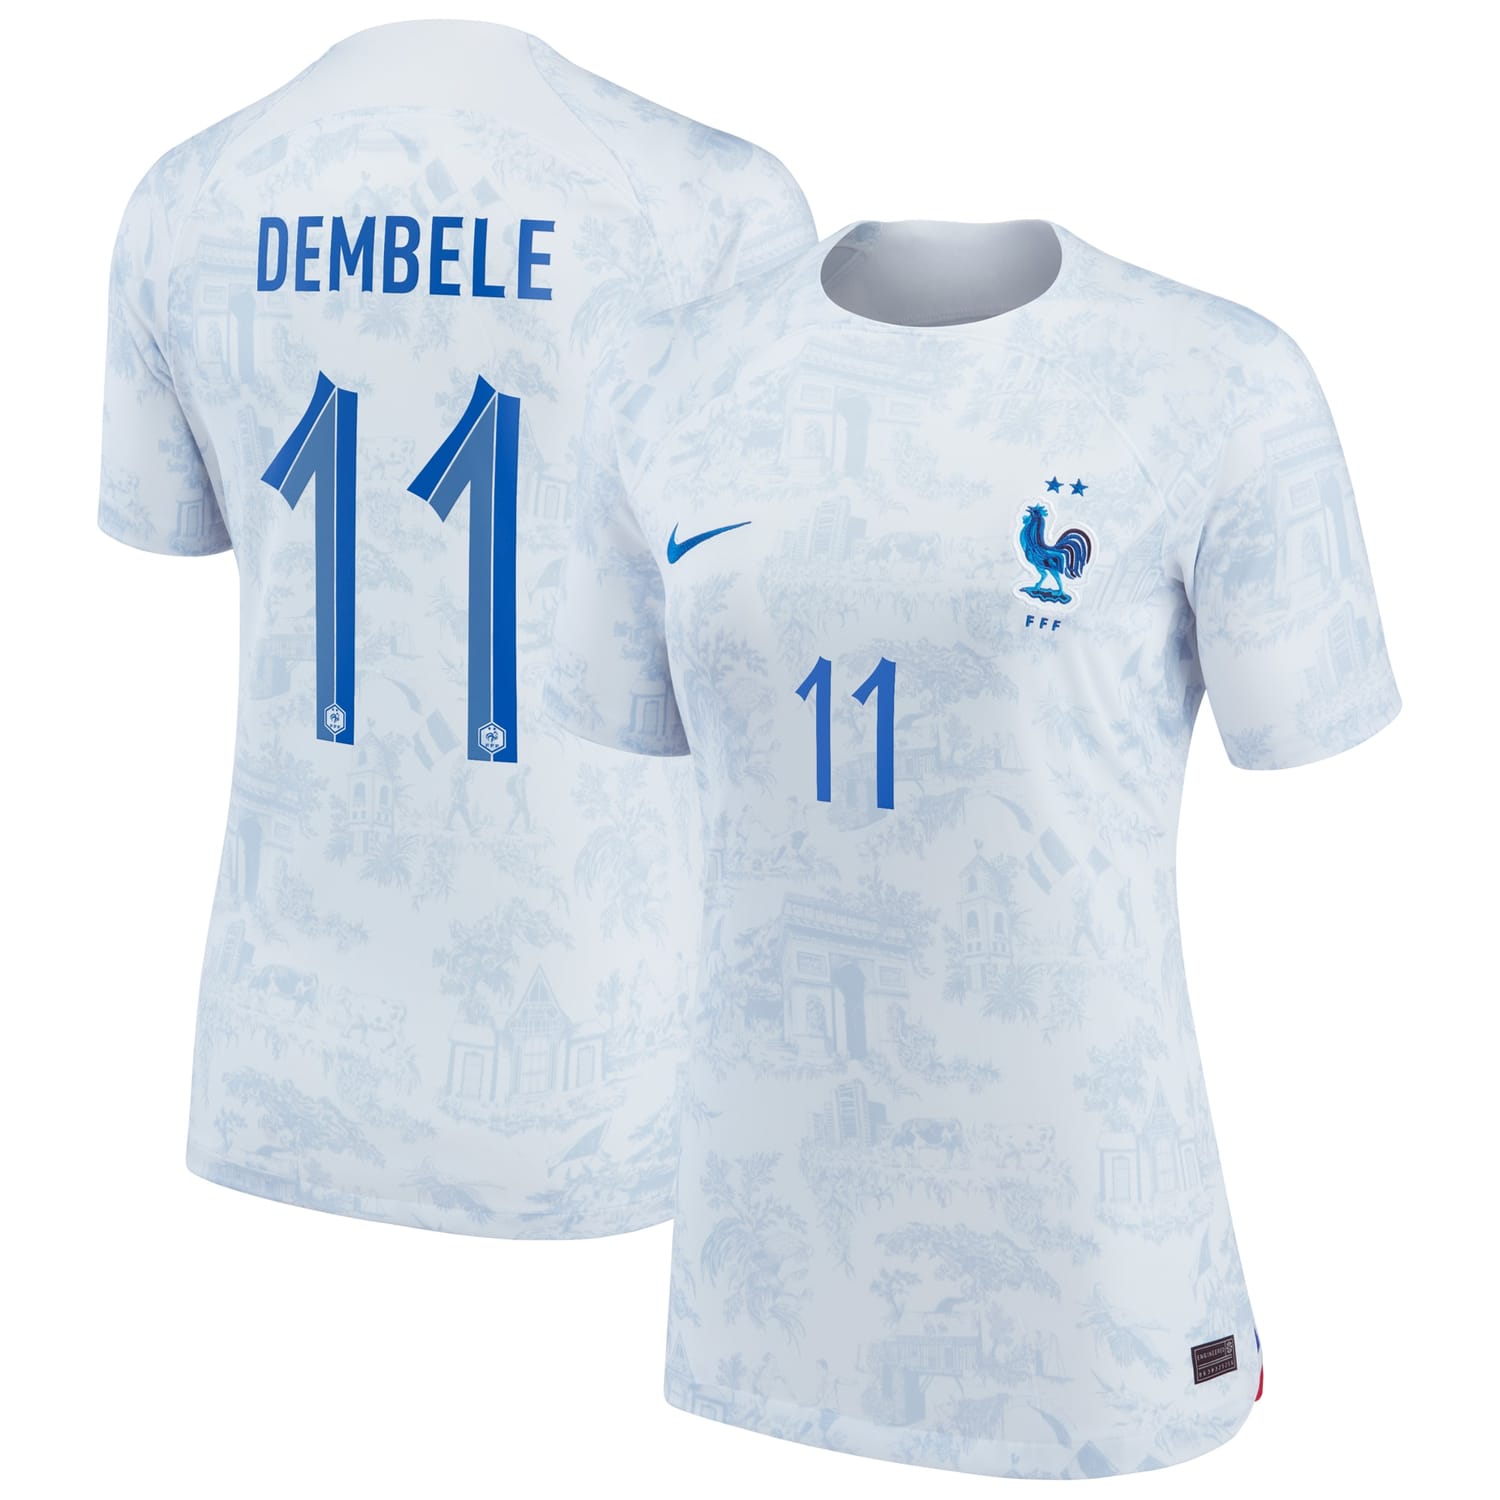 France National Team Away Jersey Shirt White 2022-23 player Ousmane Dembele printing for Women